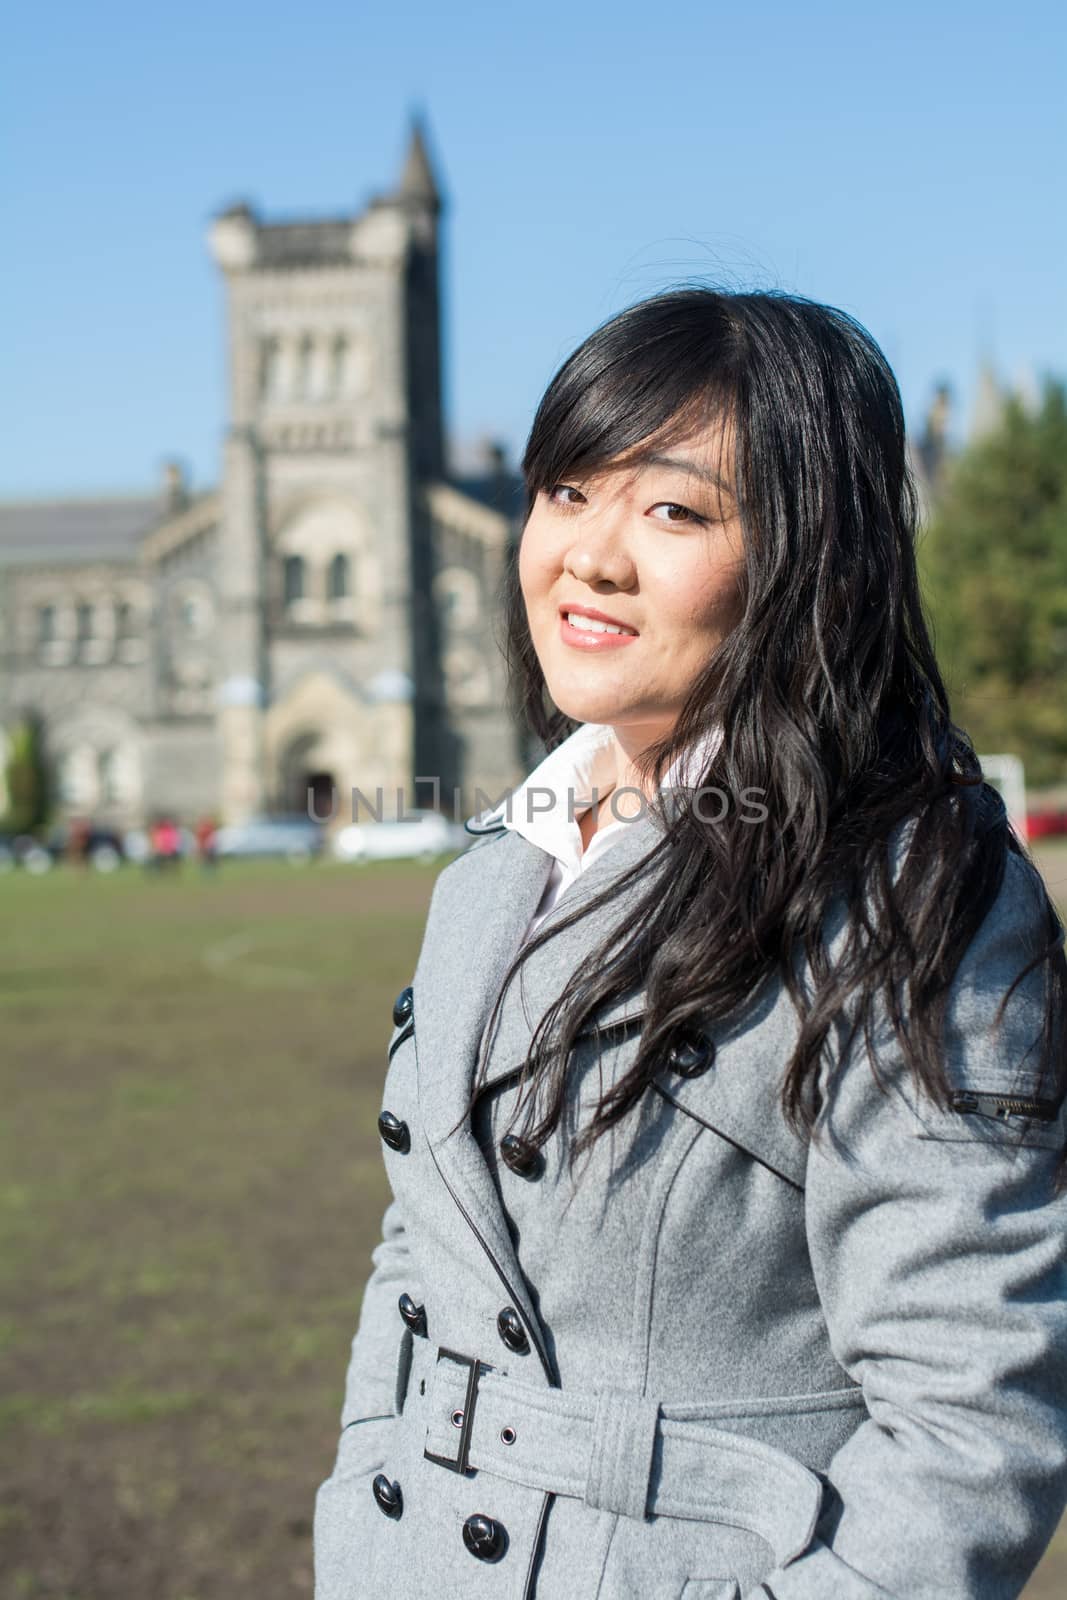 Outdoor portrait of young woman with old structure in the background